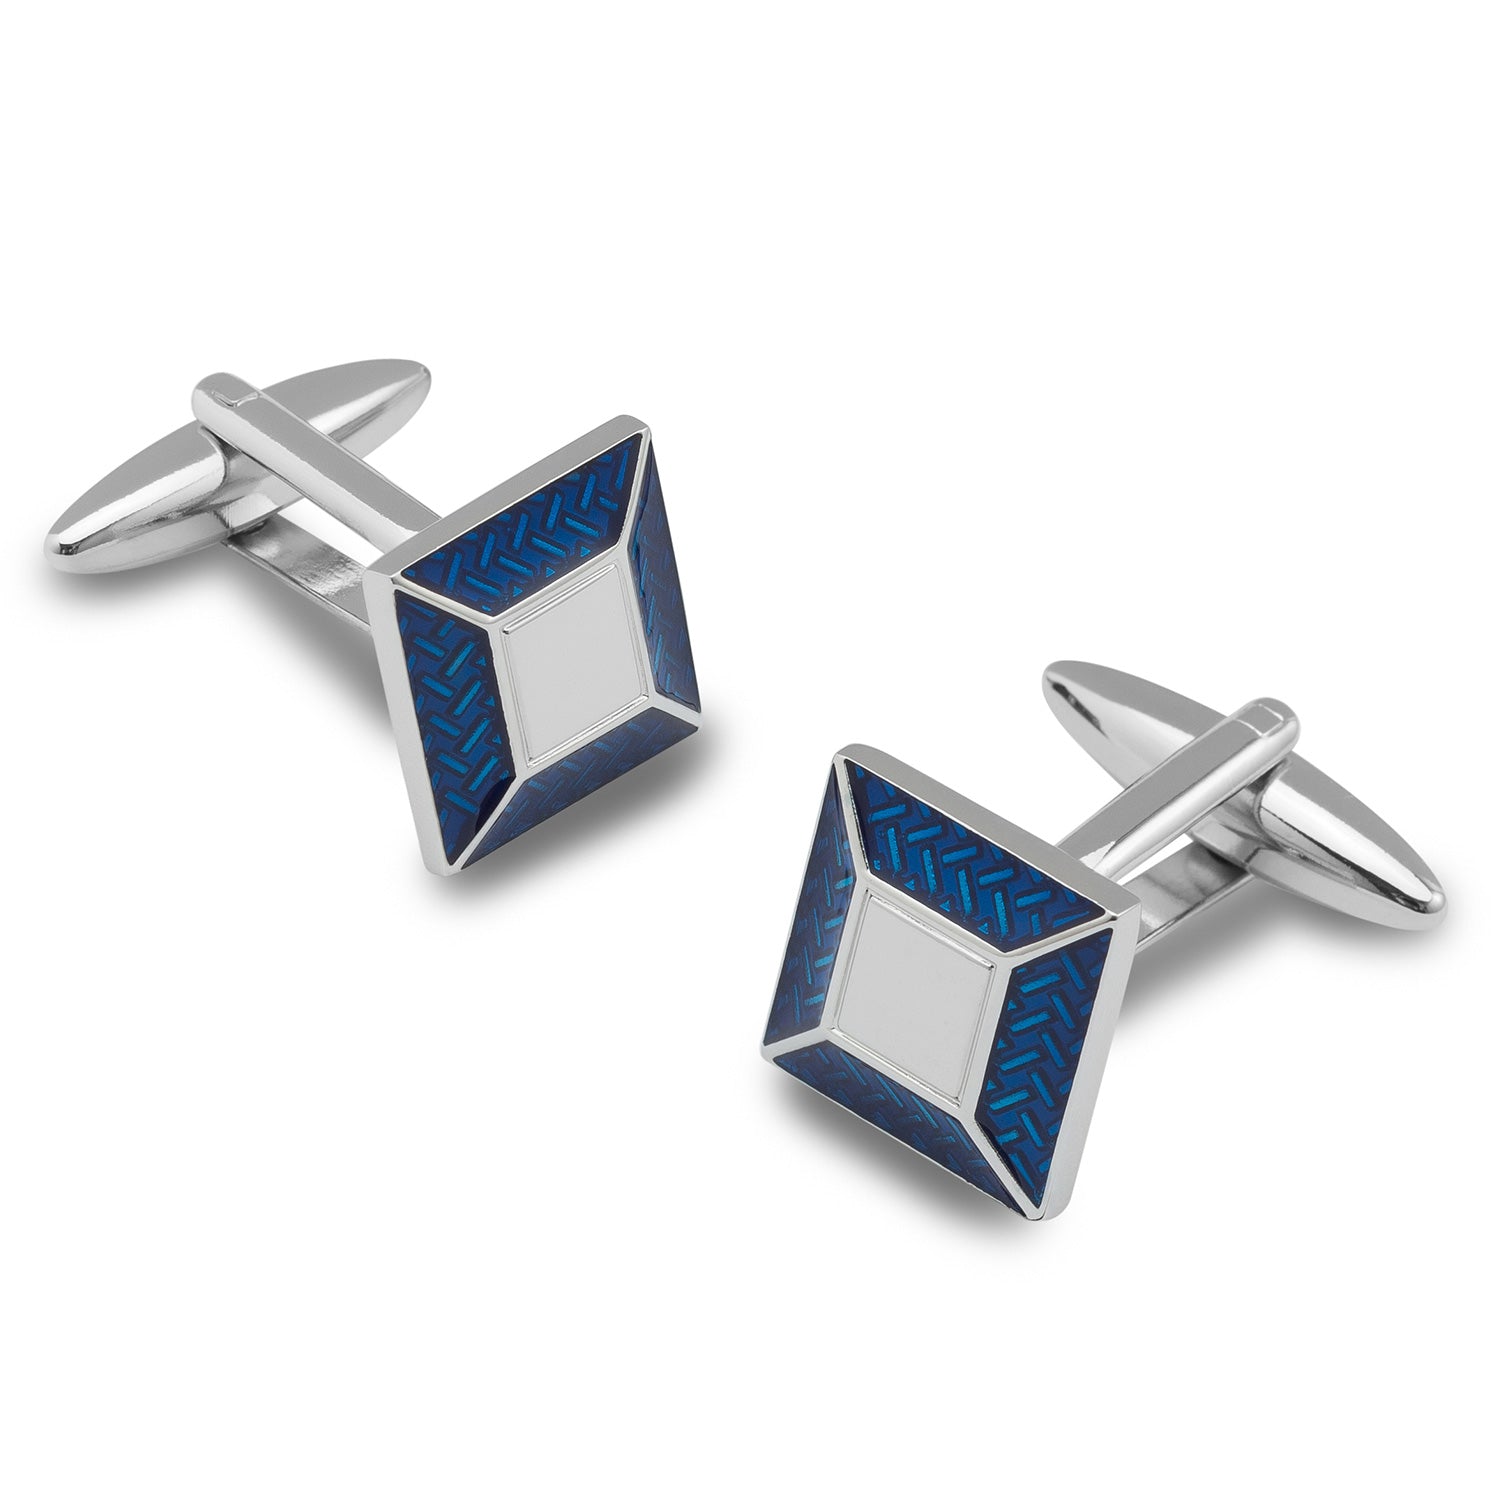 Richard III Blue and Silver Square Cufflinks